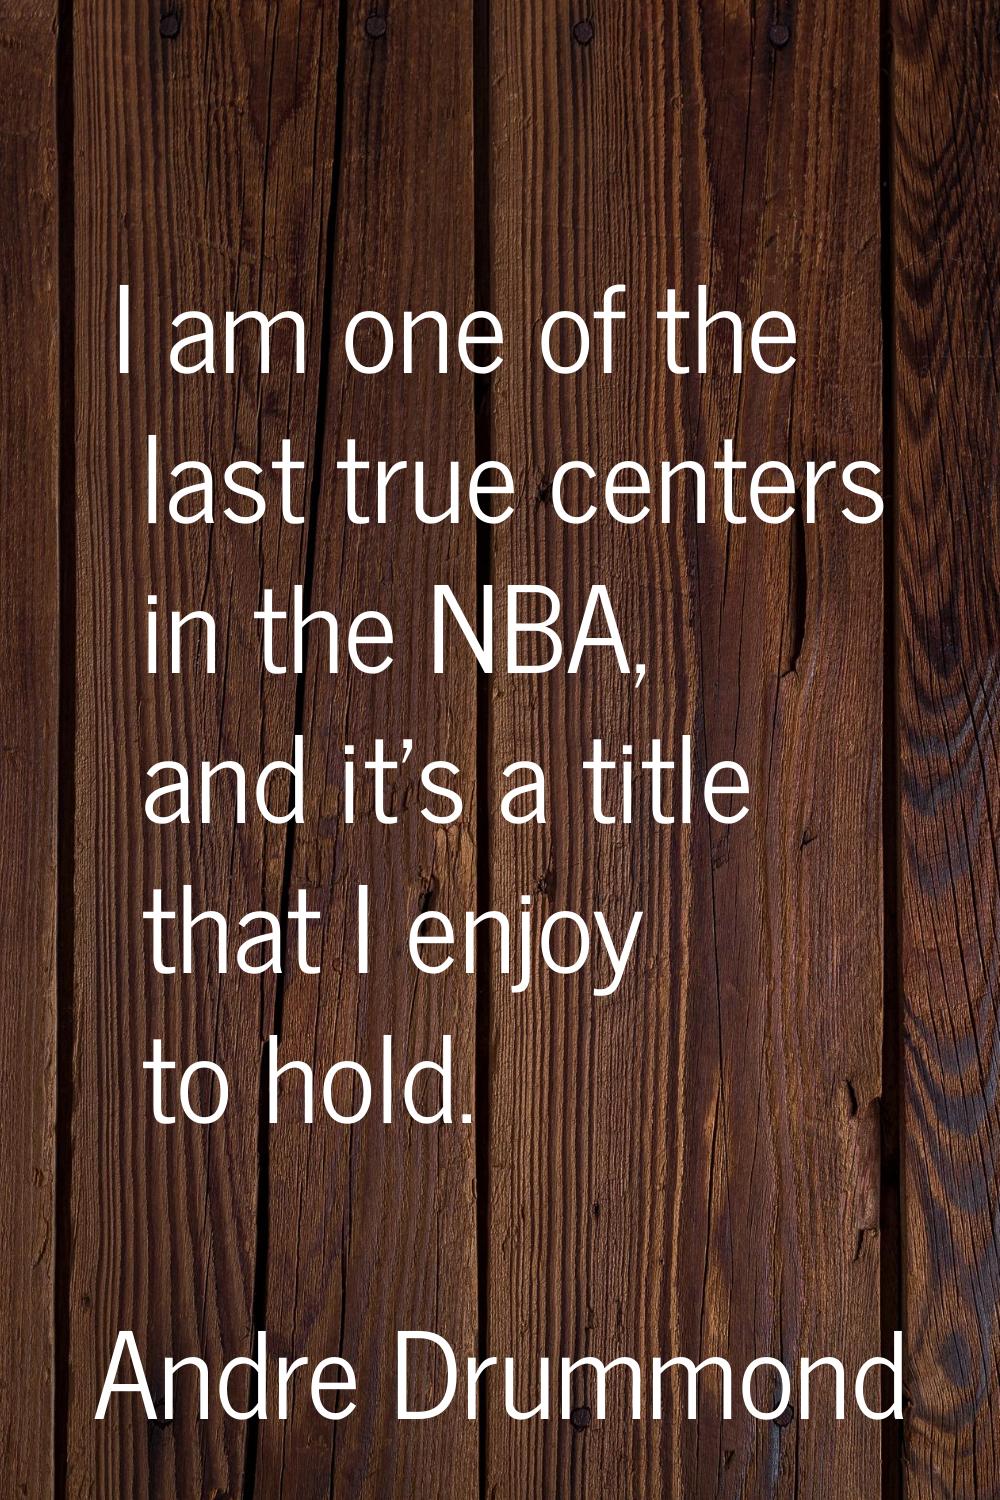 I am one of the last true centers in the NBA, and it's a title that I enjoy to hold.